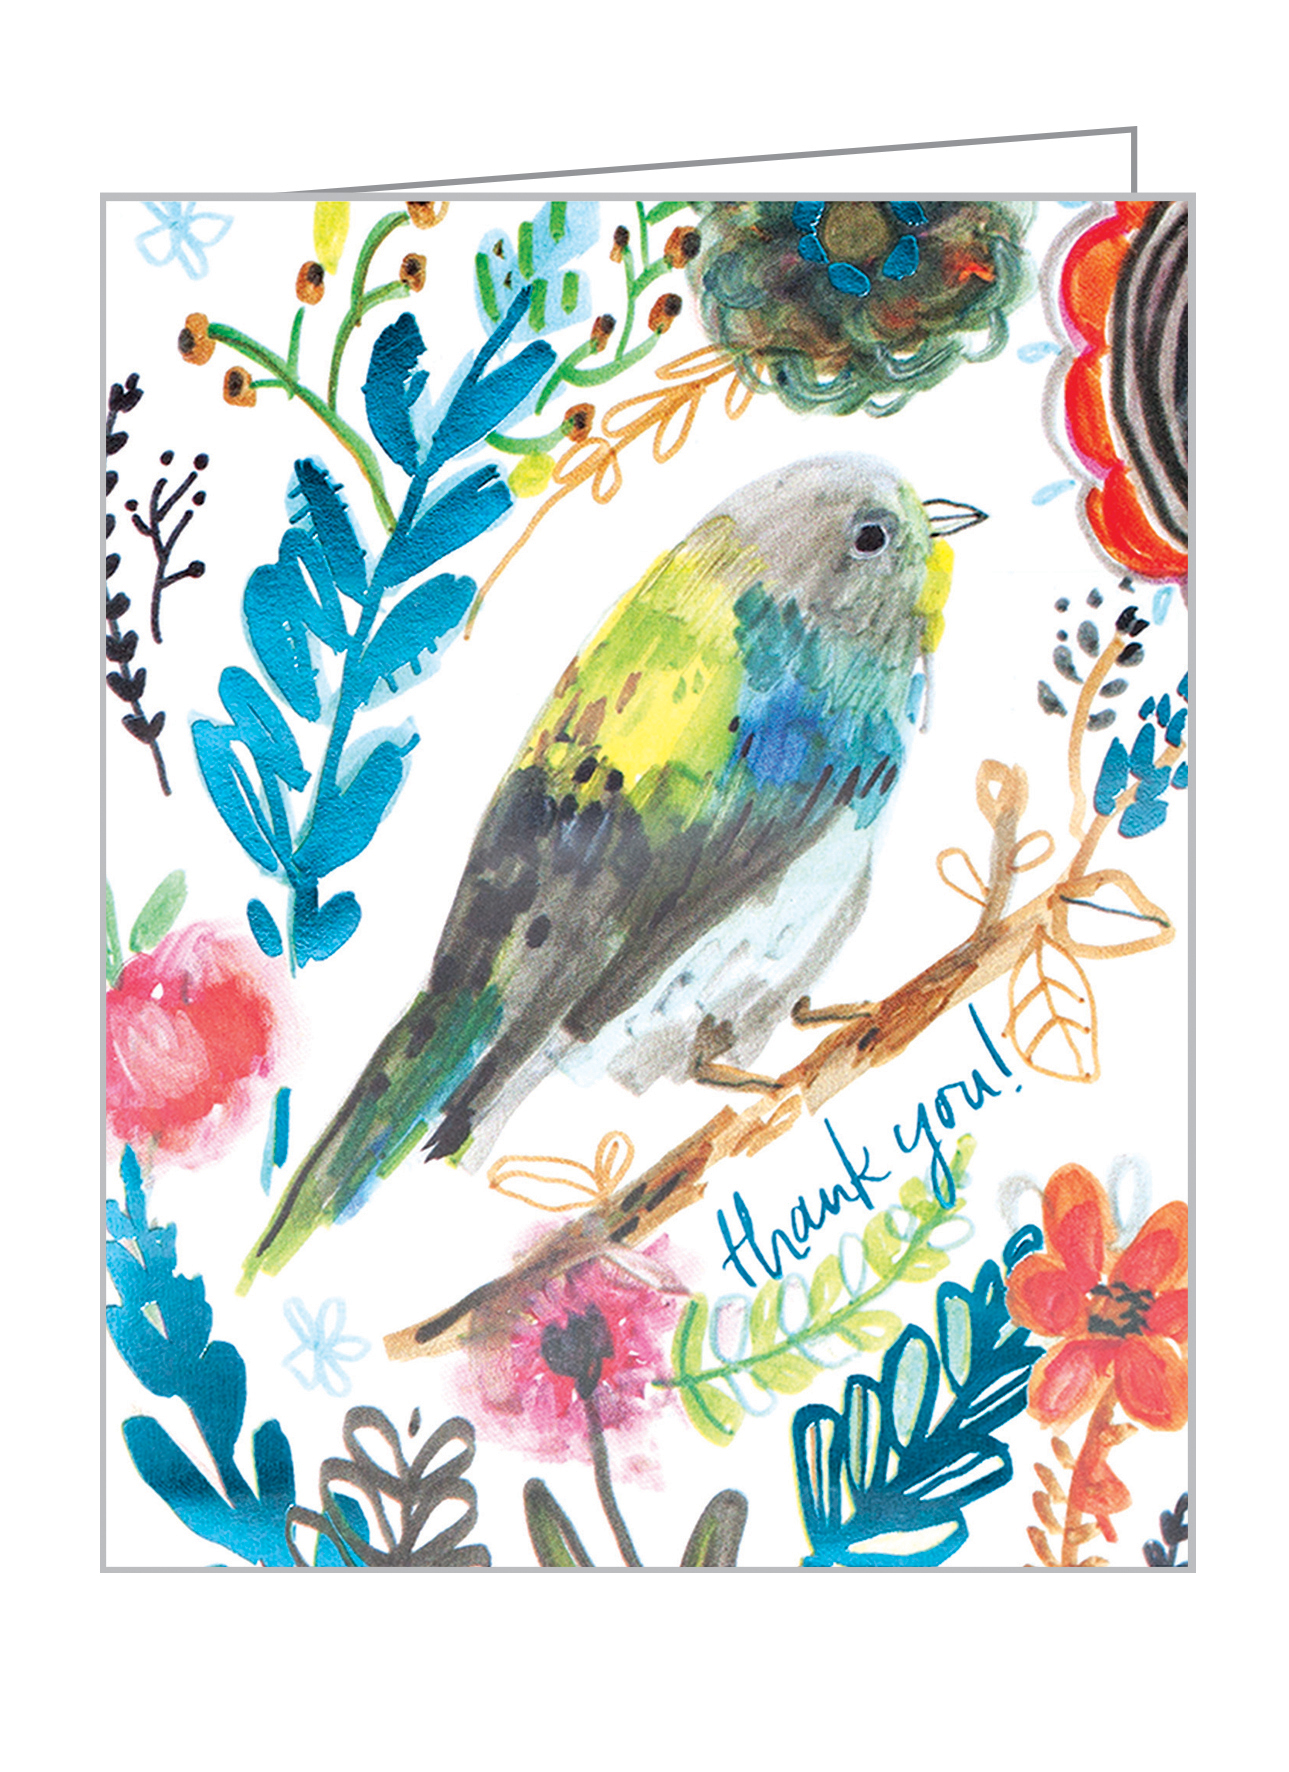 Jennifer Orkin's bold bird and floral illustration, 'thank you' in blue font below, on notecard, by teNeues stationery.